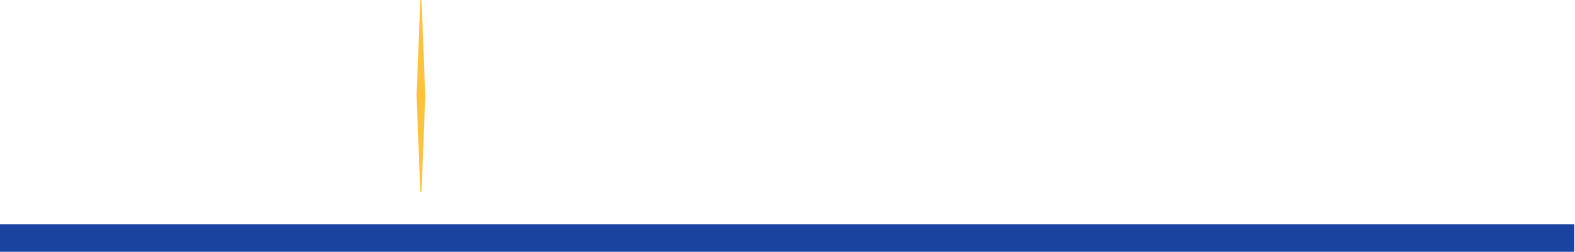 School of Science, Technology, Engineering and Math